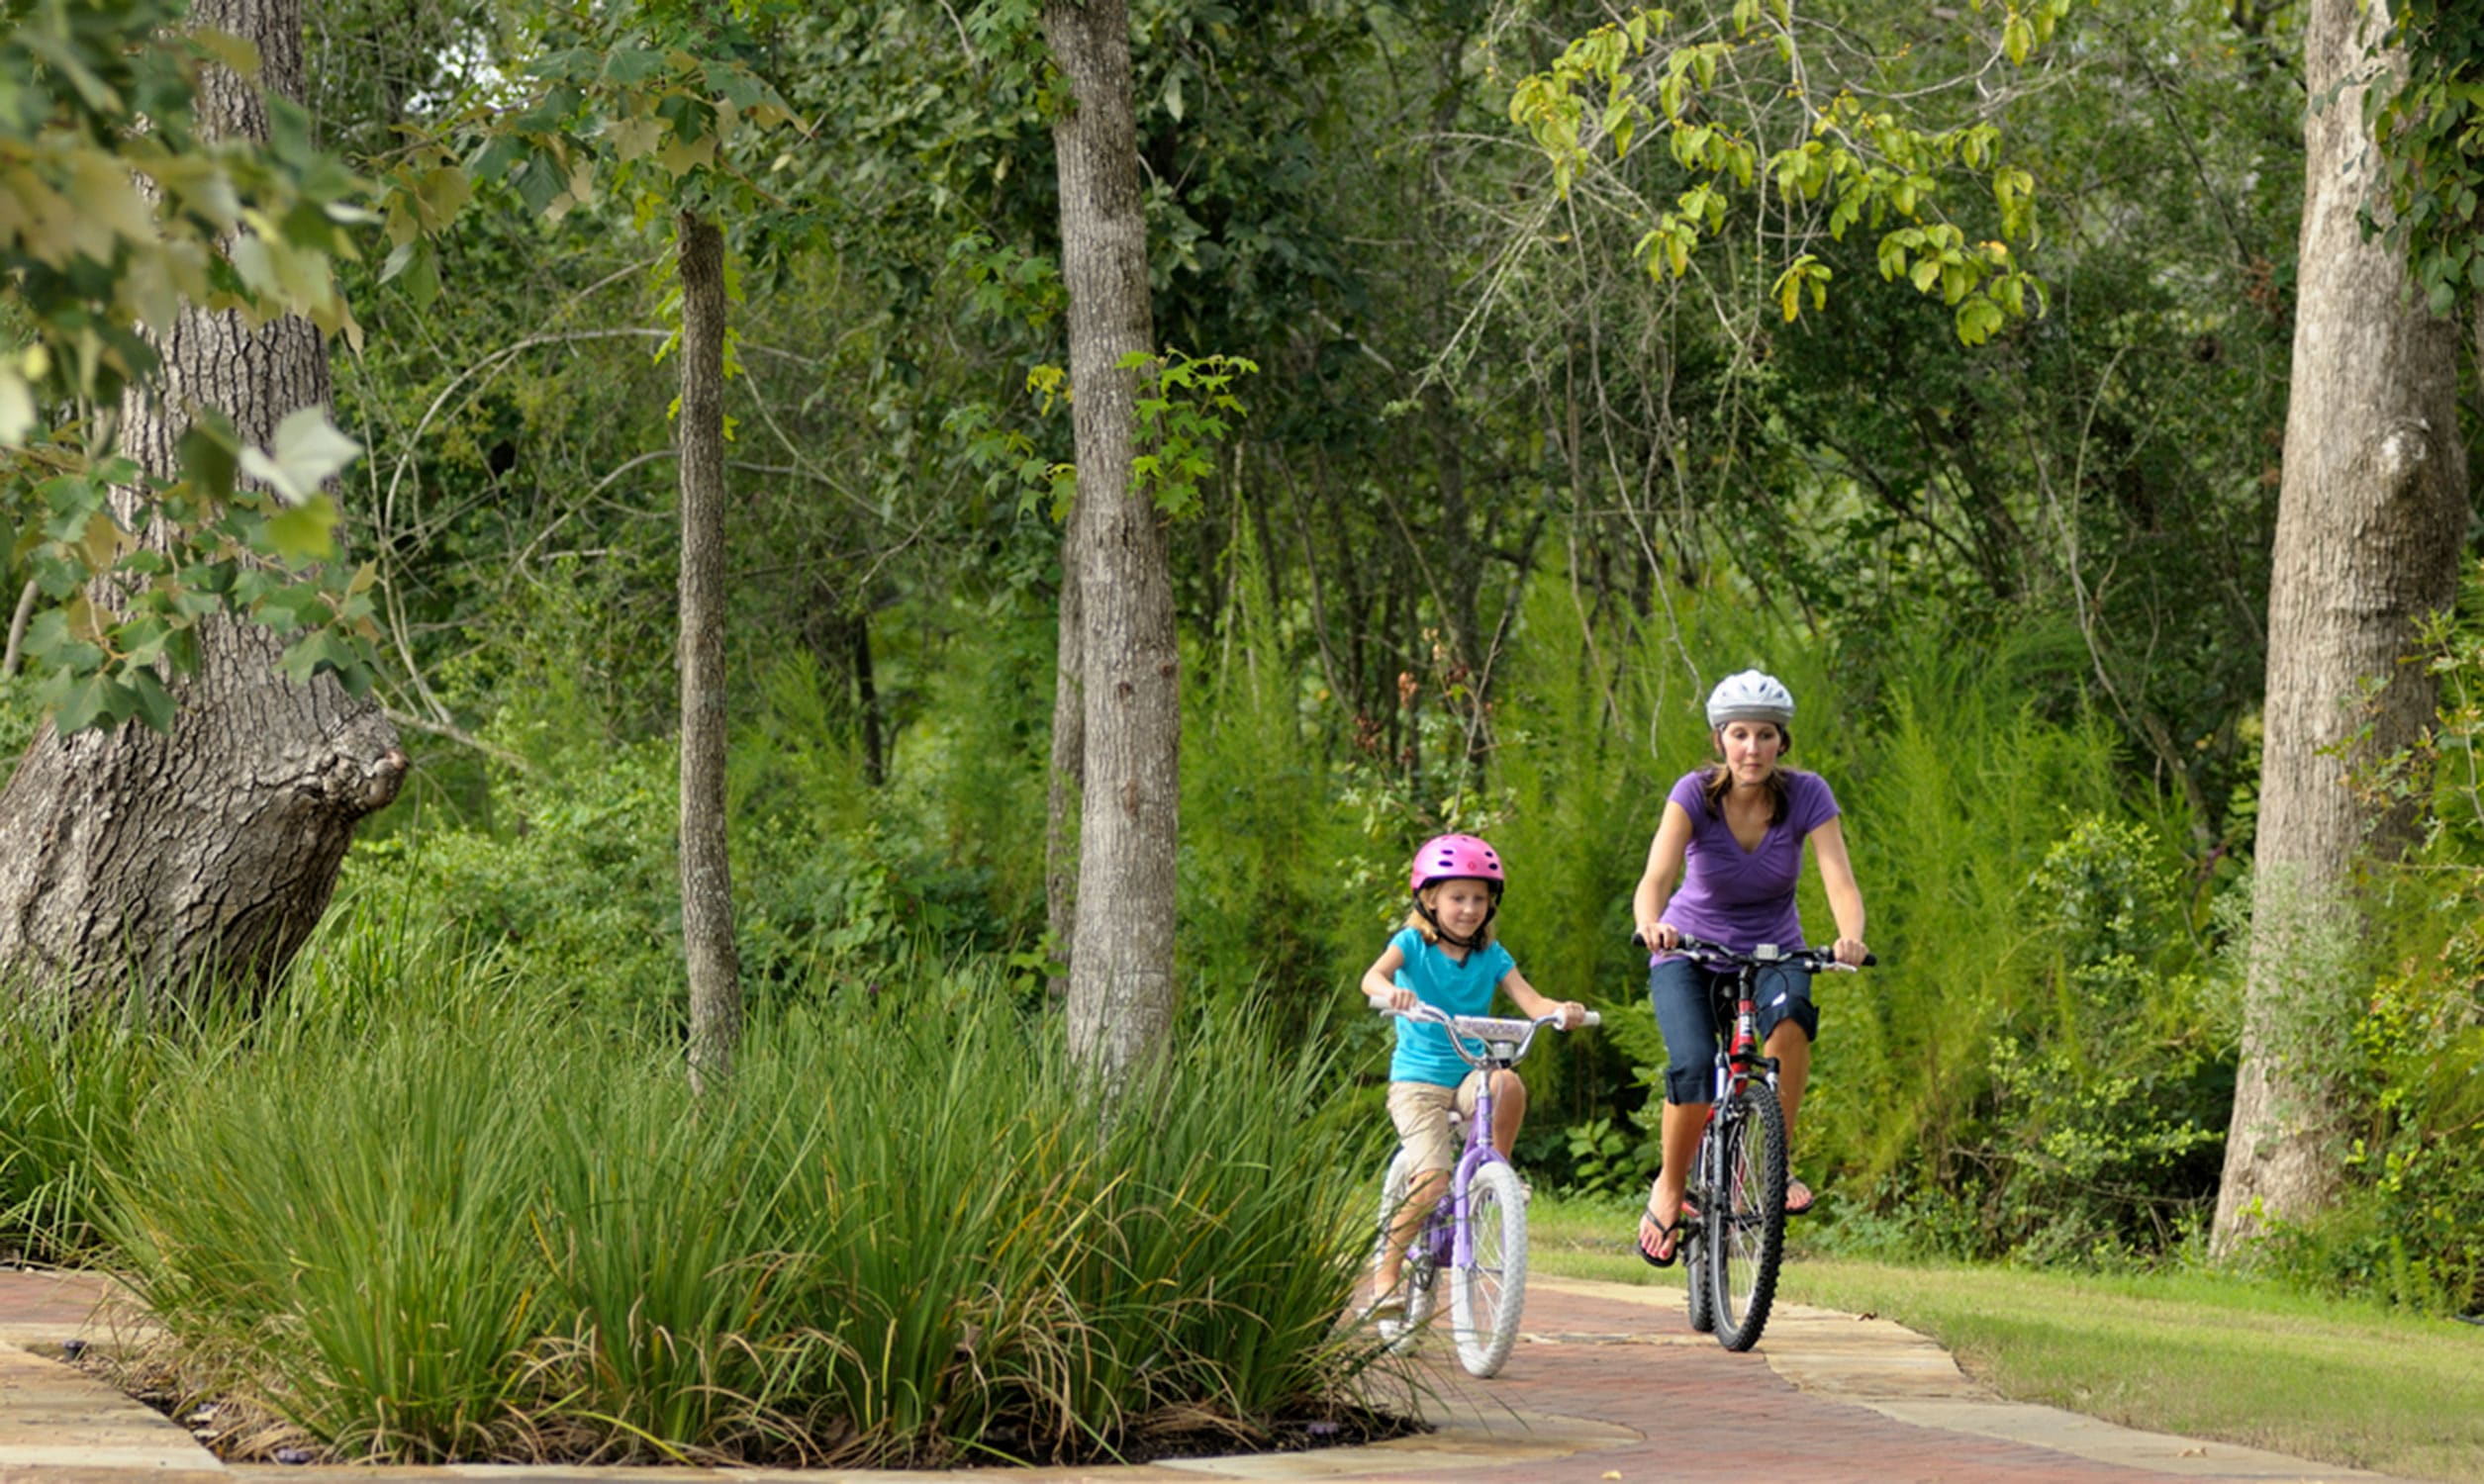 Mother and child biking in a park